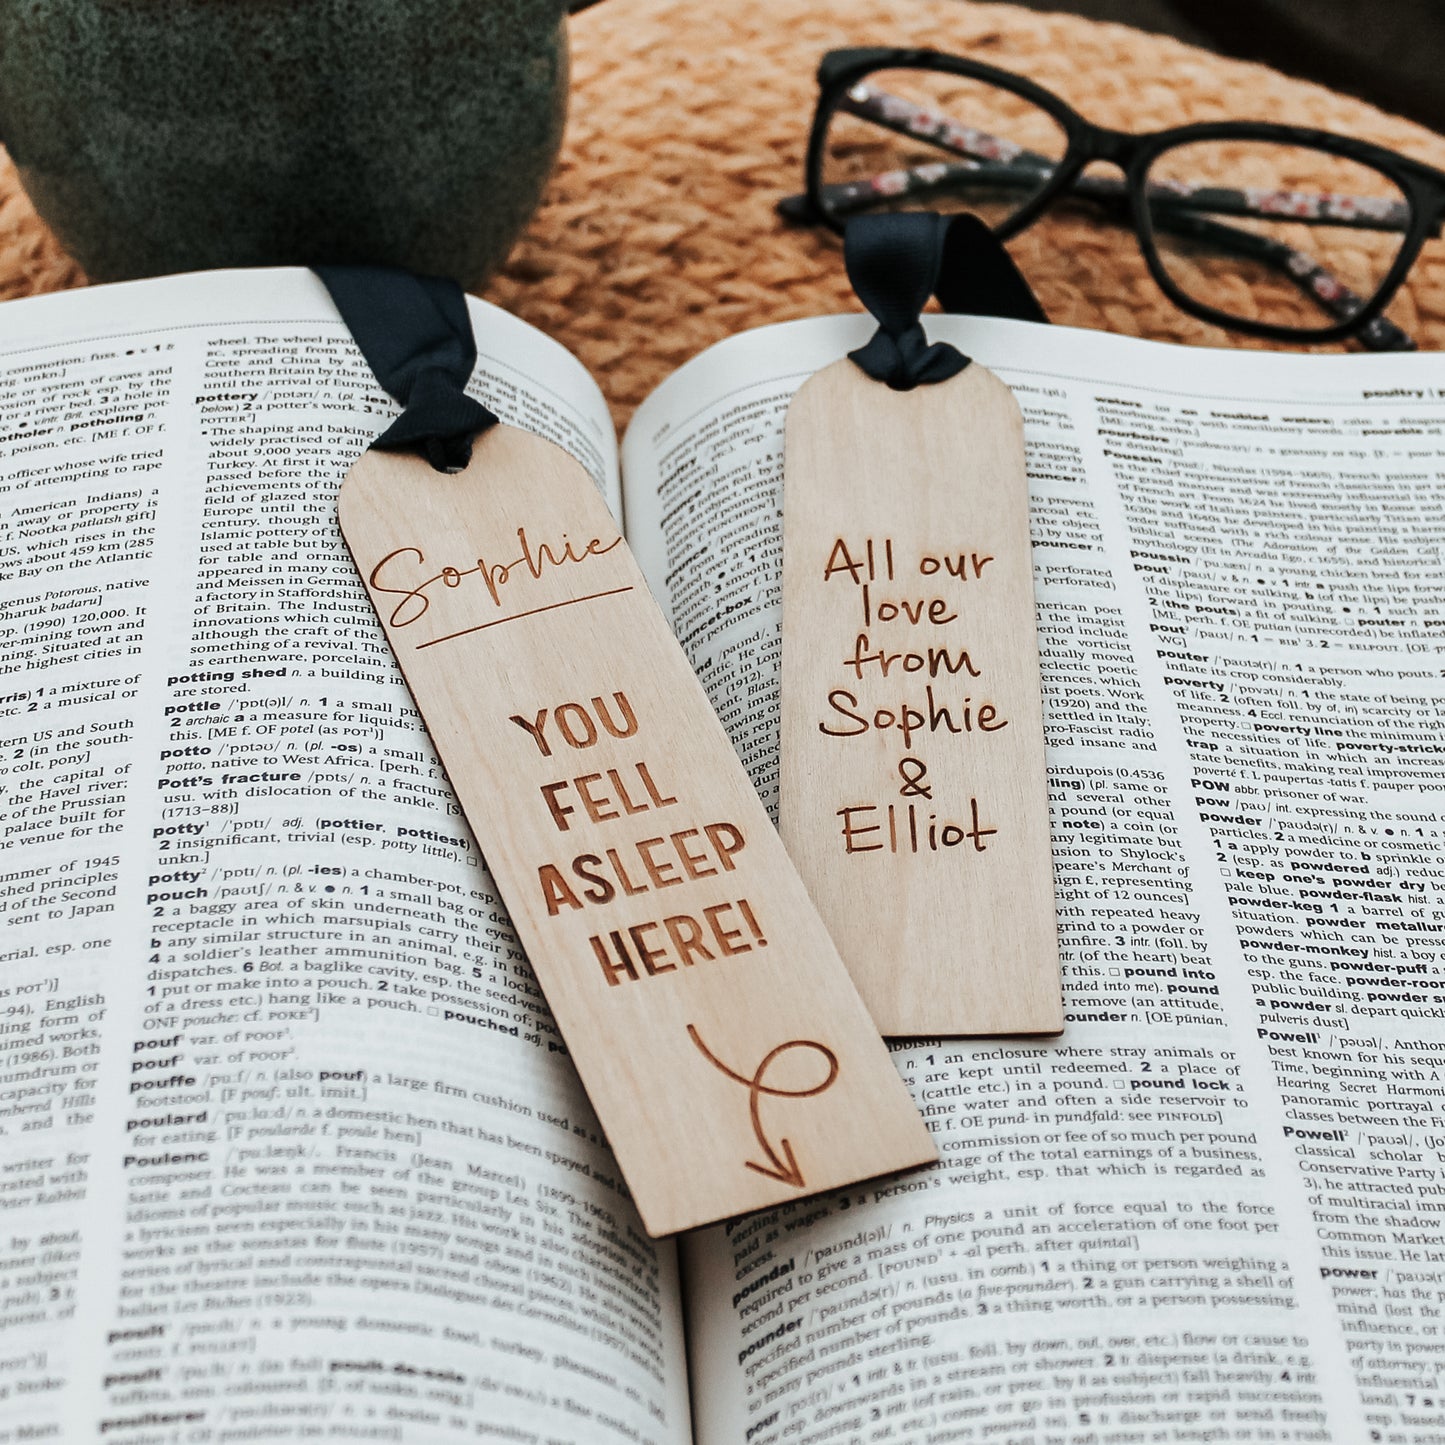 Personalised Wooden Bookmark Gift